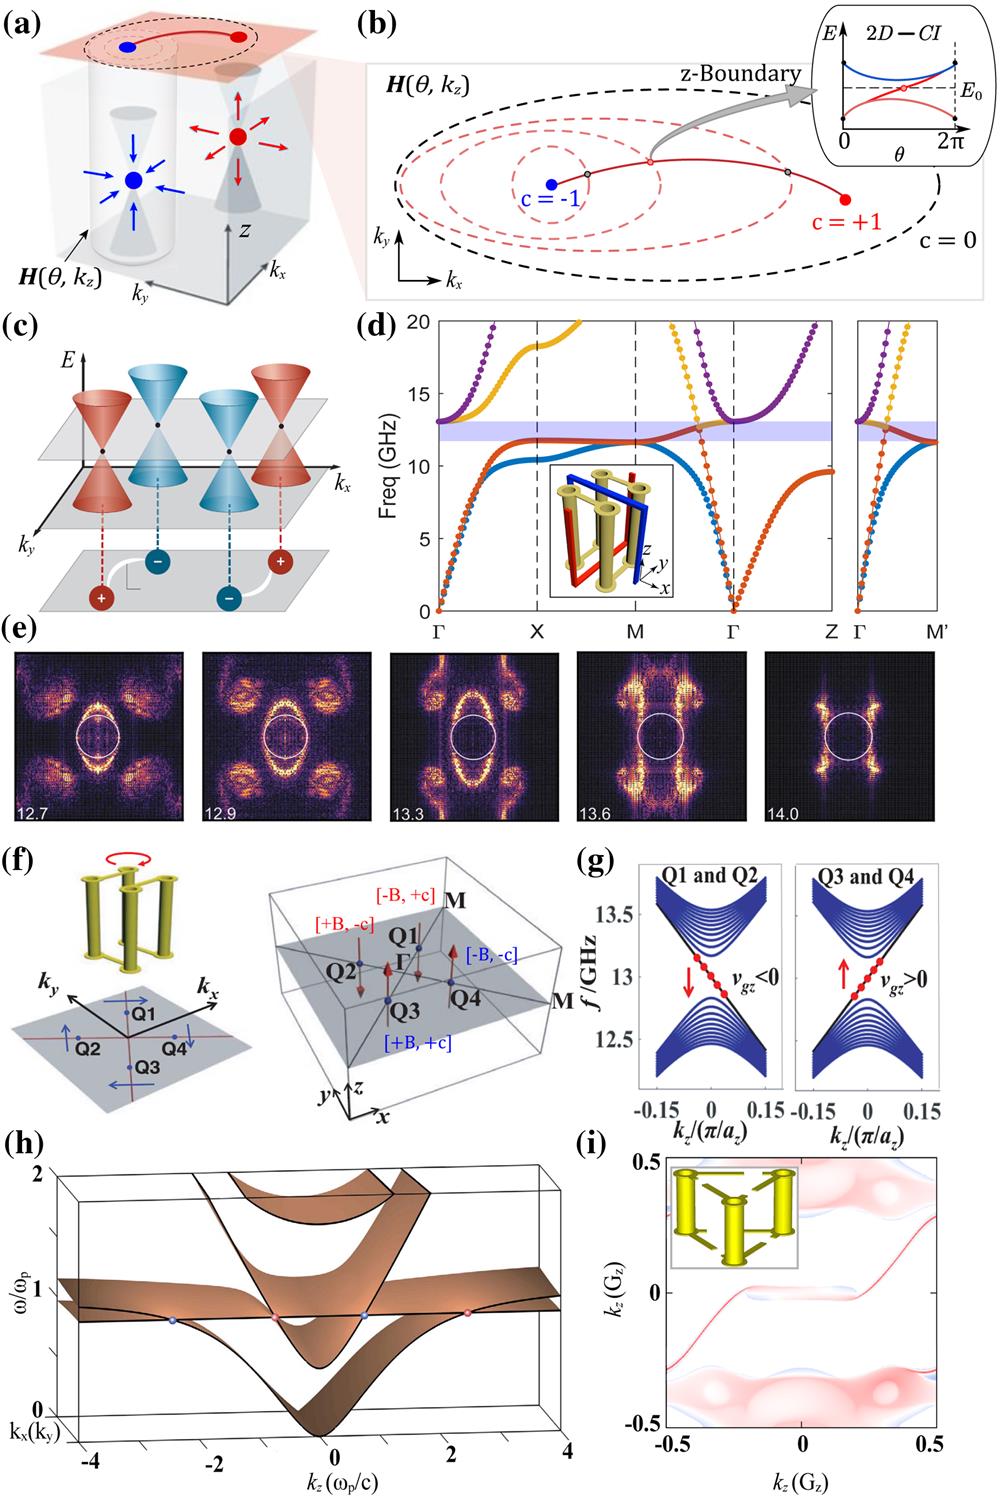 (a) Schematic diagram of WPs and the Fermi arcs. (b) Intrinsic topologically protected Fermi arcs connect two WPs with opposite chiralities. (c), (d) Structure and band topology of the ideal photonic Weyl metamaterial. (e) Experimental EFSs of the topological helicoidal surface states. (f), (g) A pseudo-gauge field generated by the space-dependent rotation angle supports a zeroth-order chiral Landau level with one-way propagation in ideal Weyl semimetals. (h) Dispersion spectrum of plasmonic WPs in magnetized plasma with time-reversal symmetry (TRS) broken. (i) Unit structure and EFS of an ideal unconventional Weyl semimetal in a chiral photonic metamaterial with C = ±2. (c)–(e) Adapted from [76,77], (f), (g) from [54], (h) from [78], and (i) from [79].